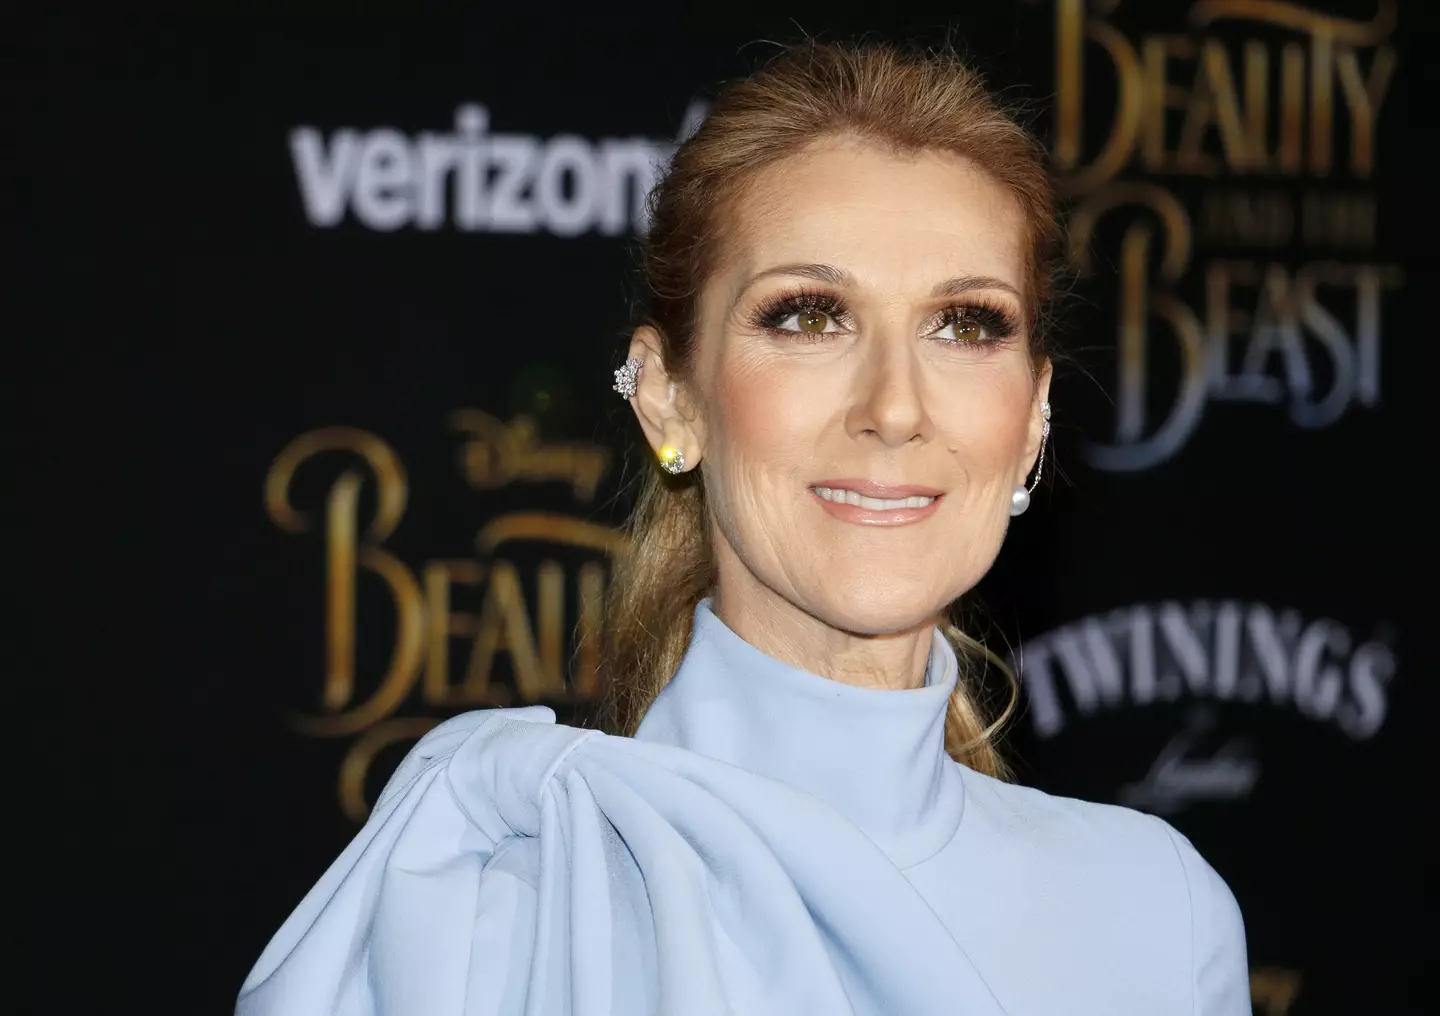 Celine Dion was not featured on the list.